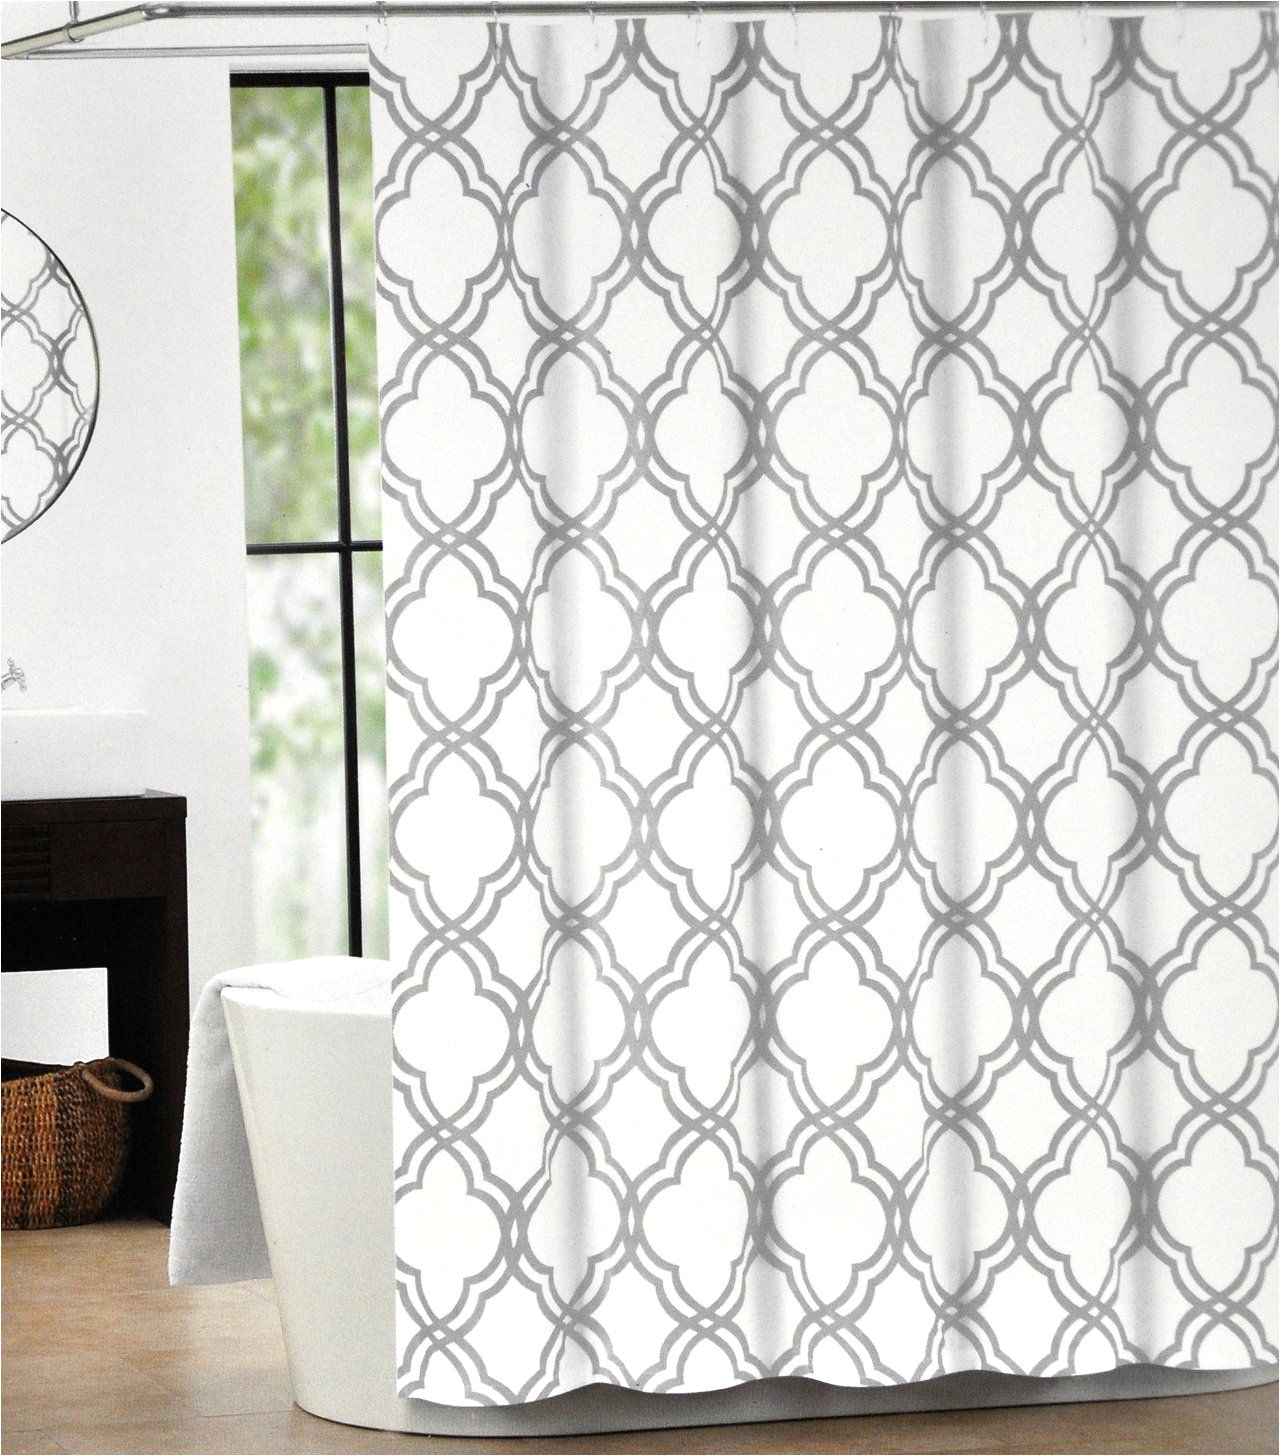 amazon com tahari home cotton shower curtain moroccan tile quatrefoil silver gray and white lattice 72 inch by 72 inch for the home pinterest